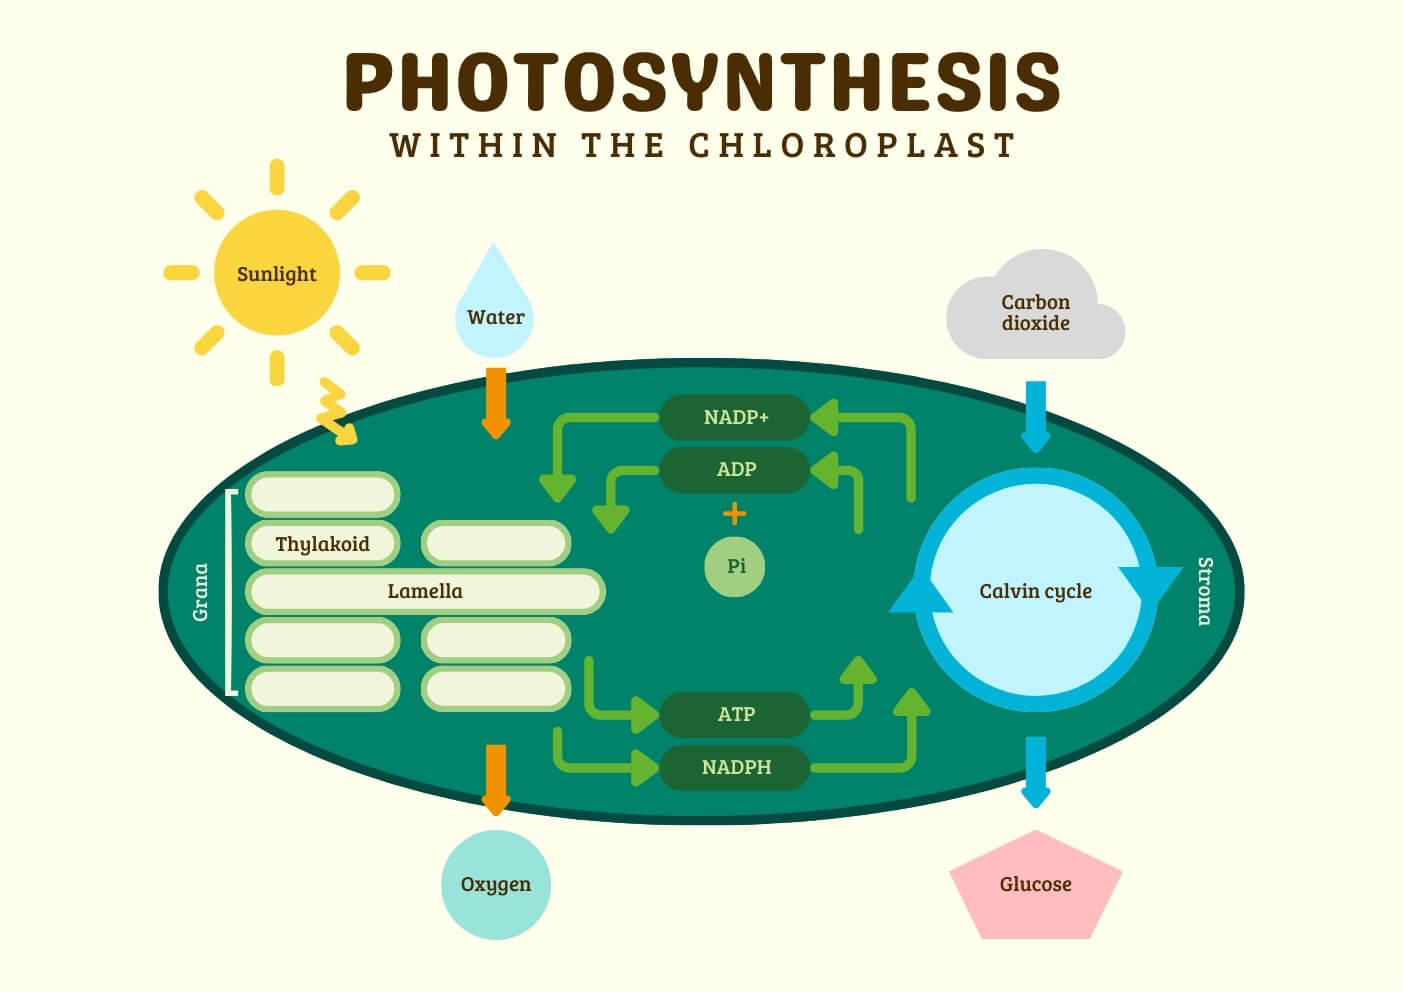 Photosynthesis within the Chloroplast